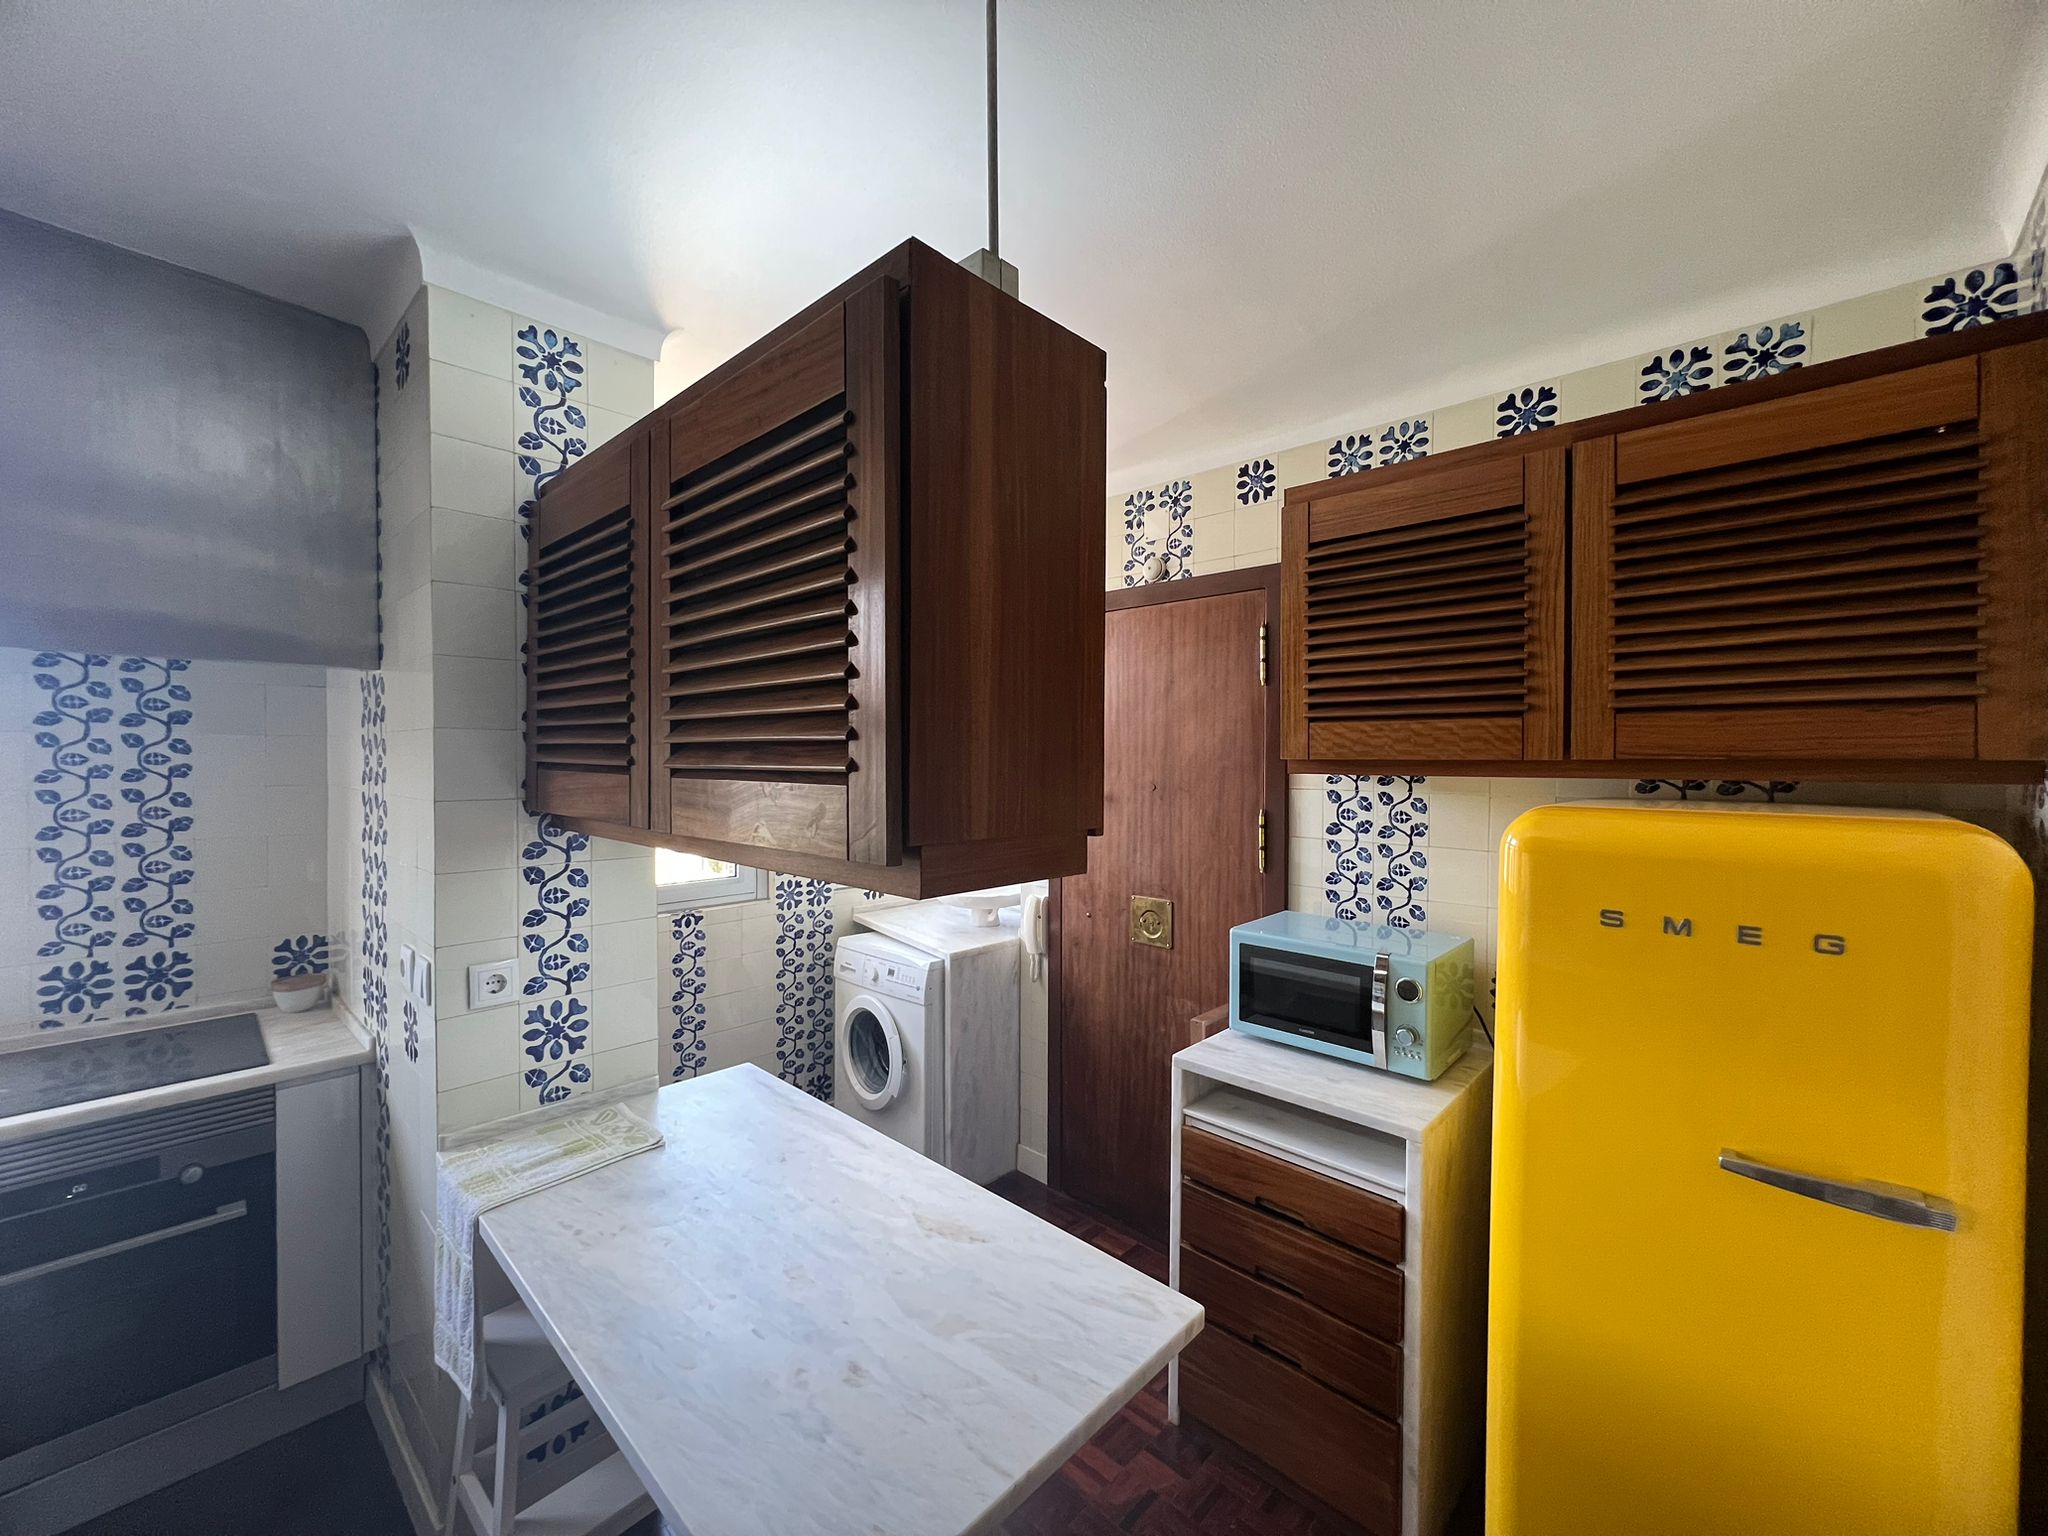 Apartment for rent in Lisbon - kitchen